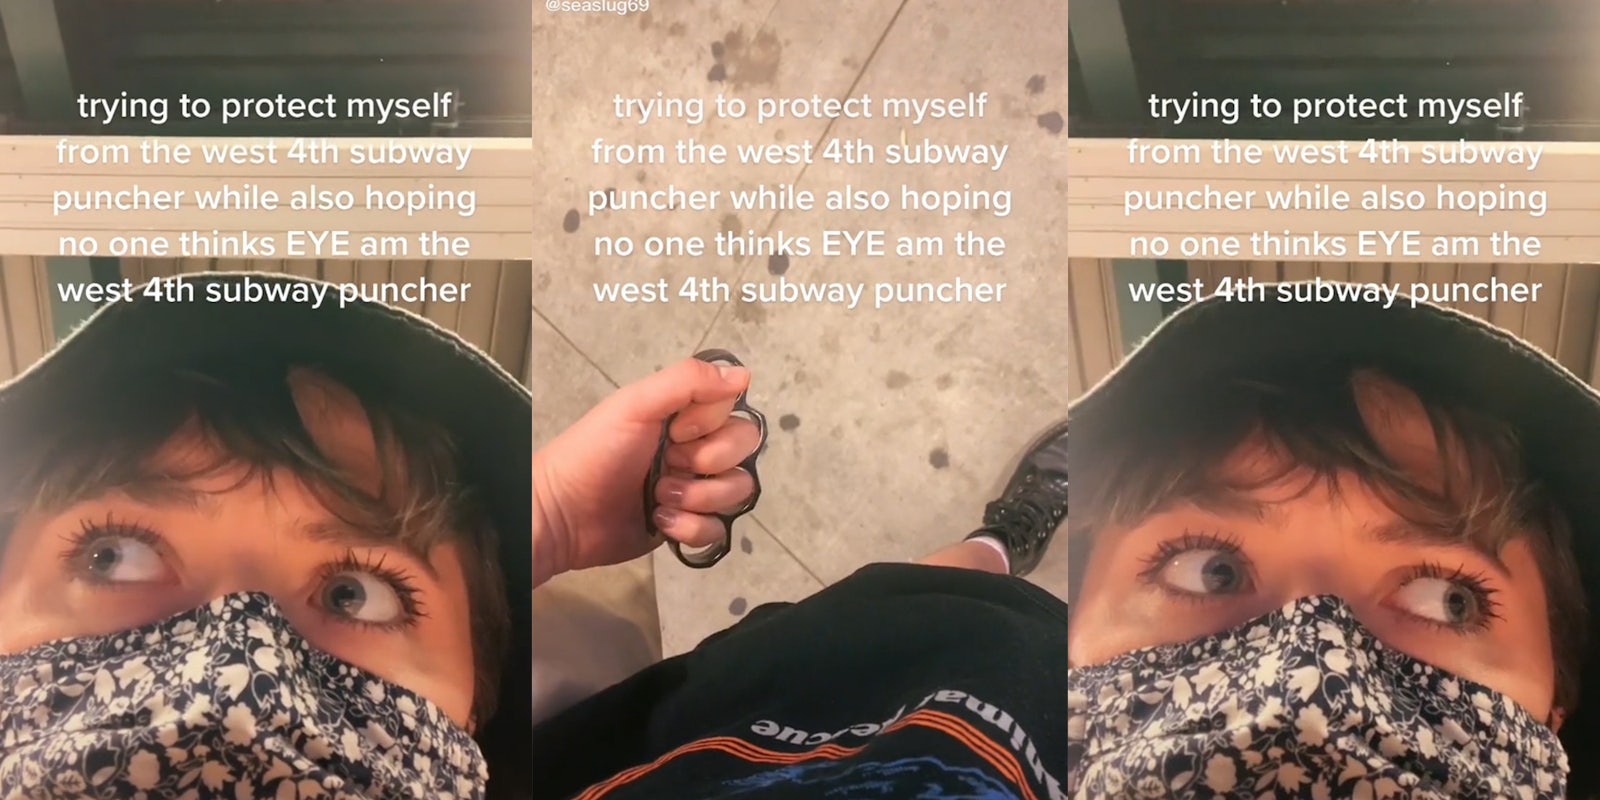 person holding brass knuckles, looking from side to side with caption 'trying to protect myself from the west 4th subway puncher while also hoping no one things EYE am the west 4th subway puncher'